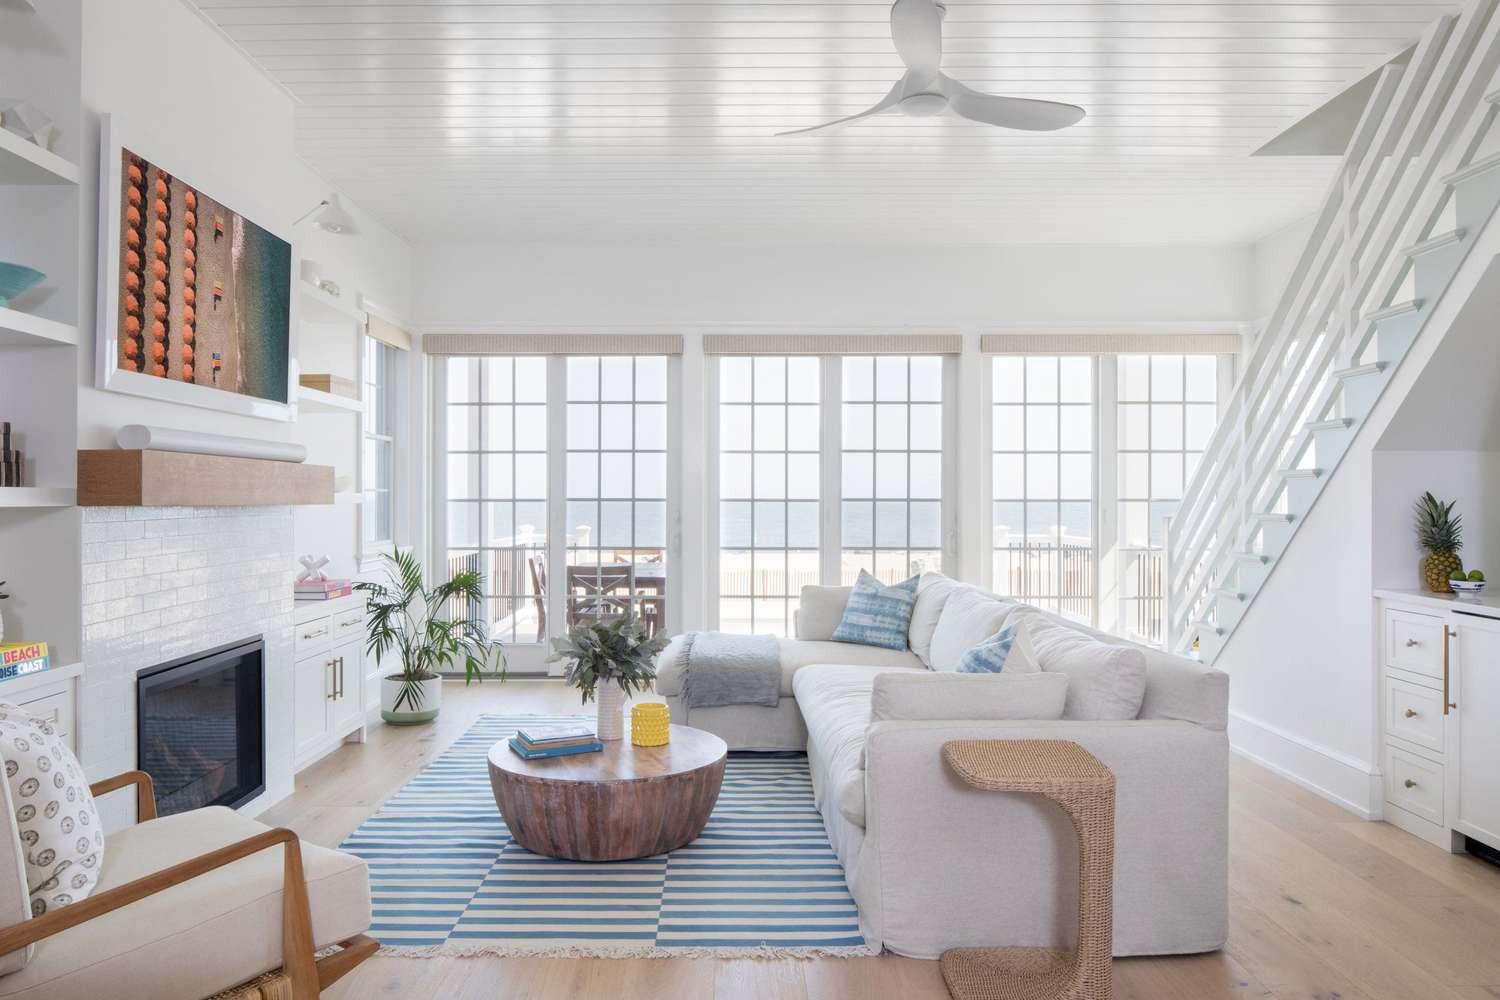 Coastal Living Rooms That Feel Like a Day at the Beach